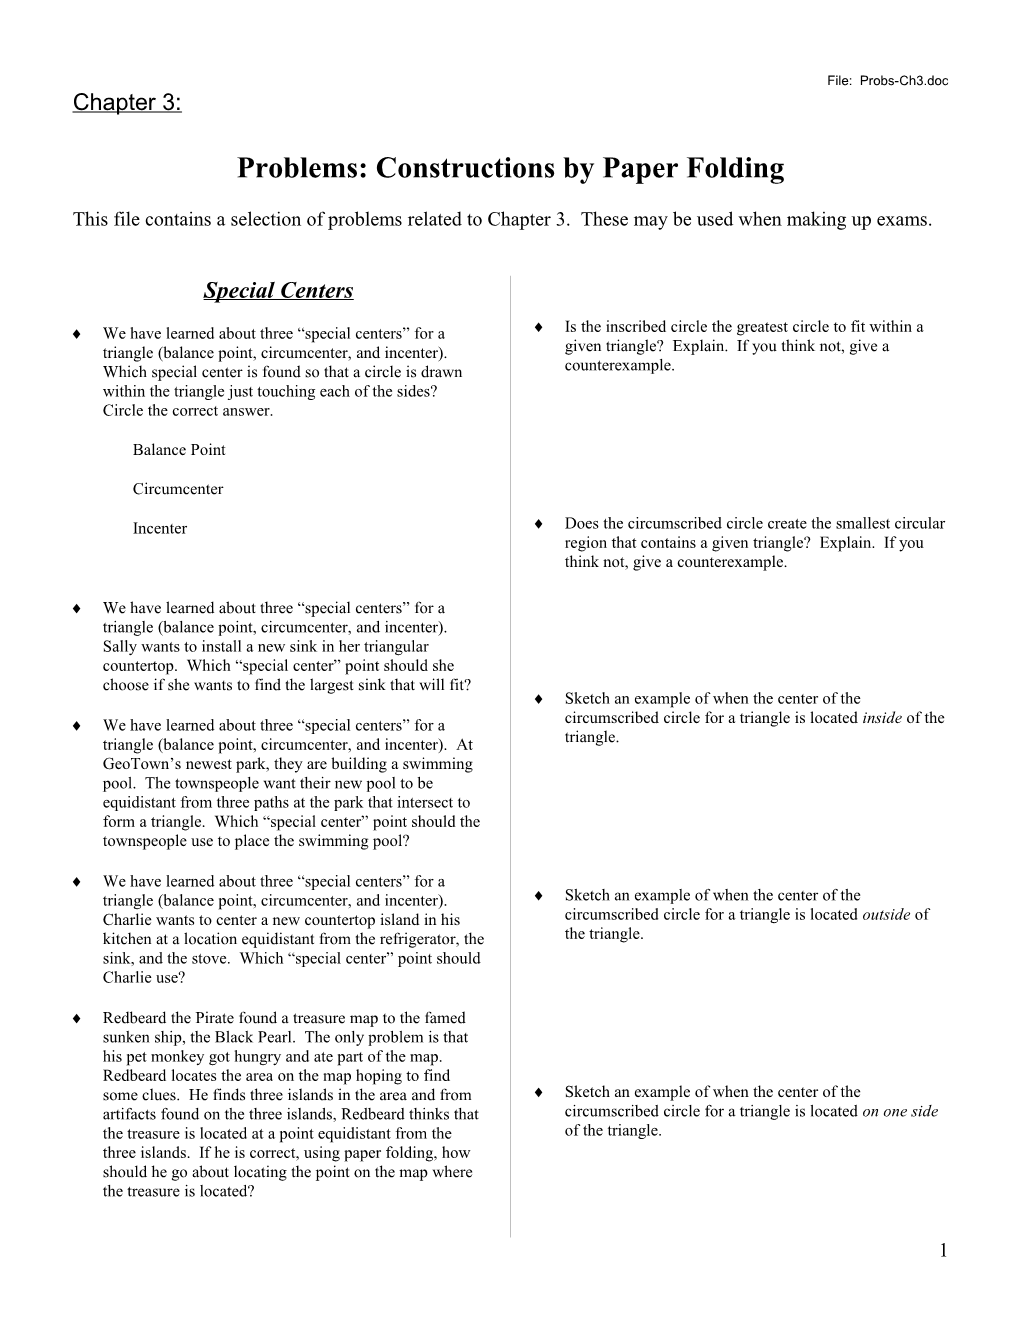 Problems: Constructions by Paper Folding